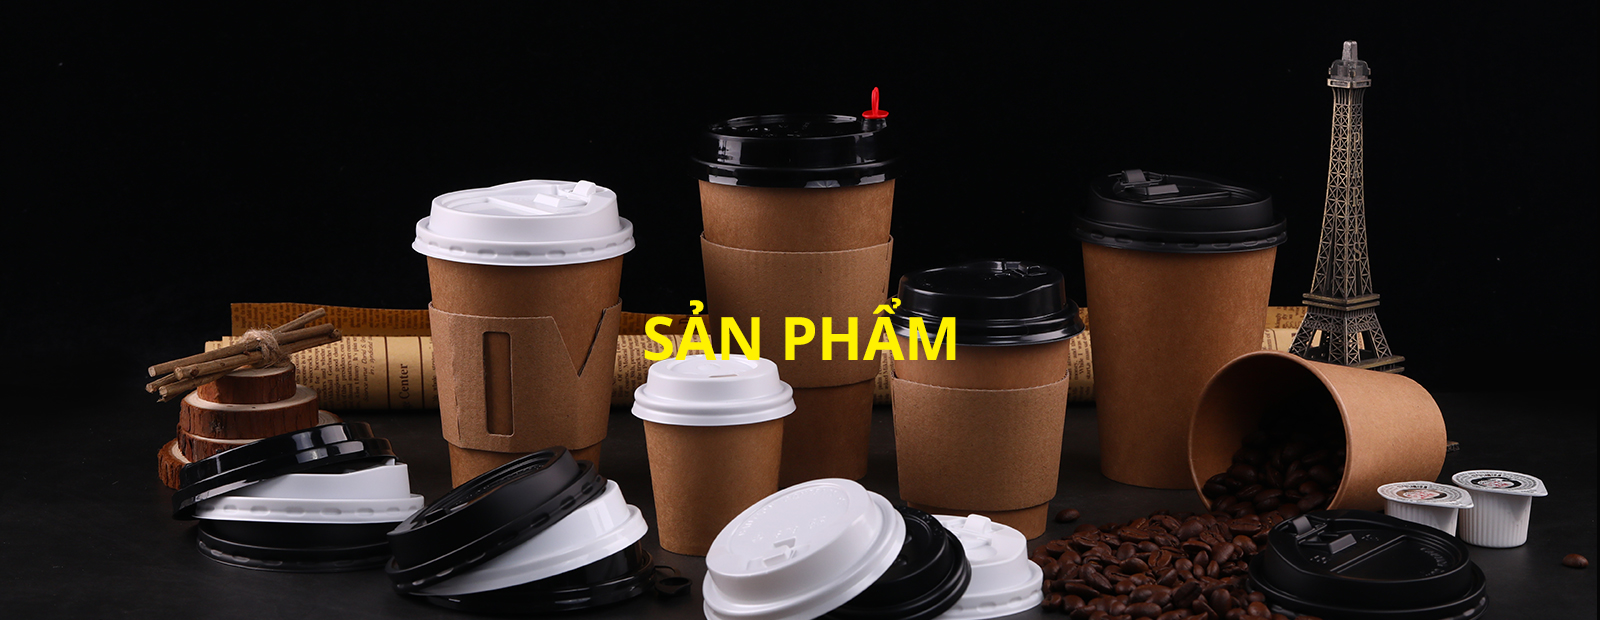 Bamboo pulp paper cup  Ly giấy tre